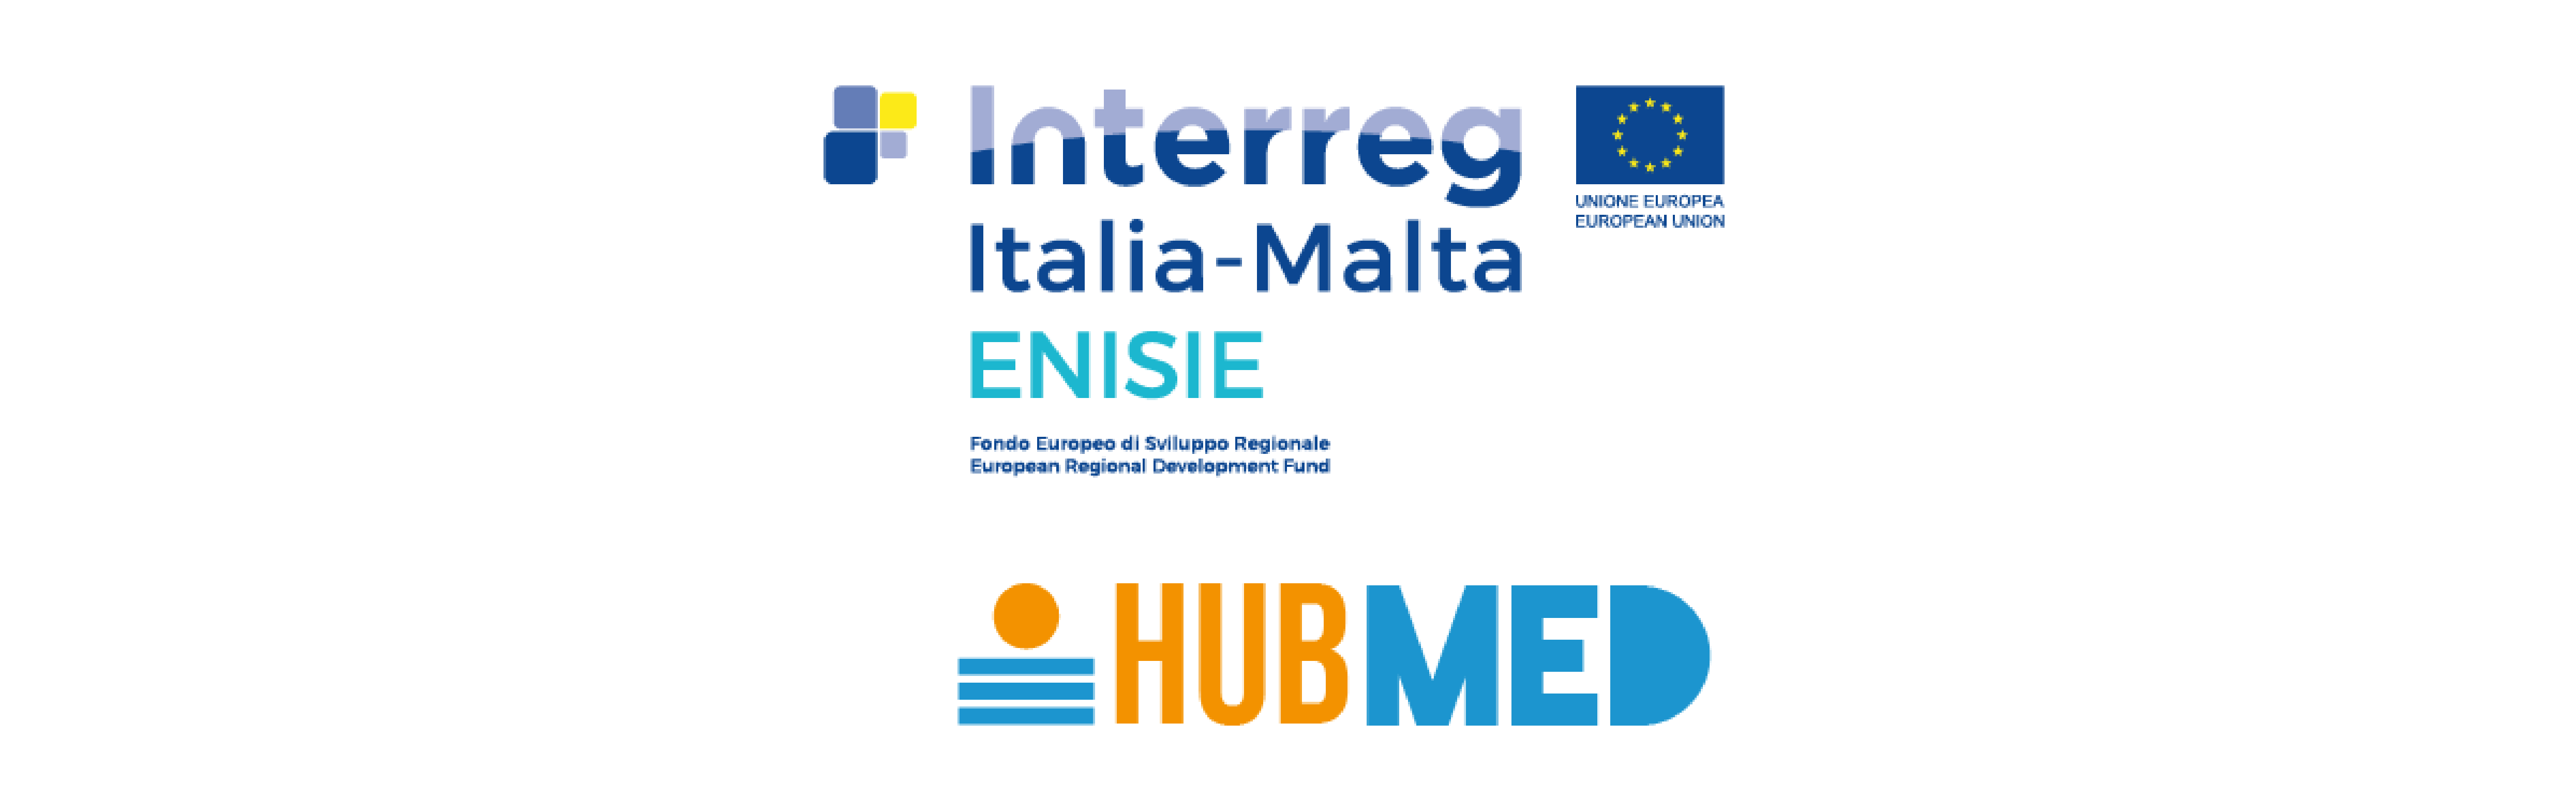 HUB MED, A NEW ACTIVITY BY ENISIE